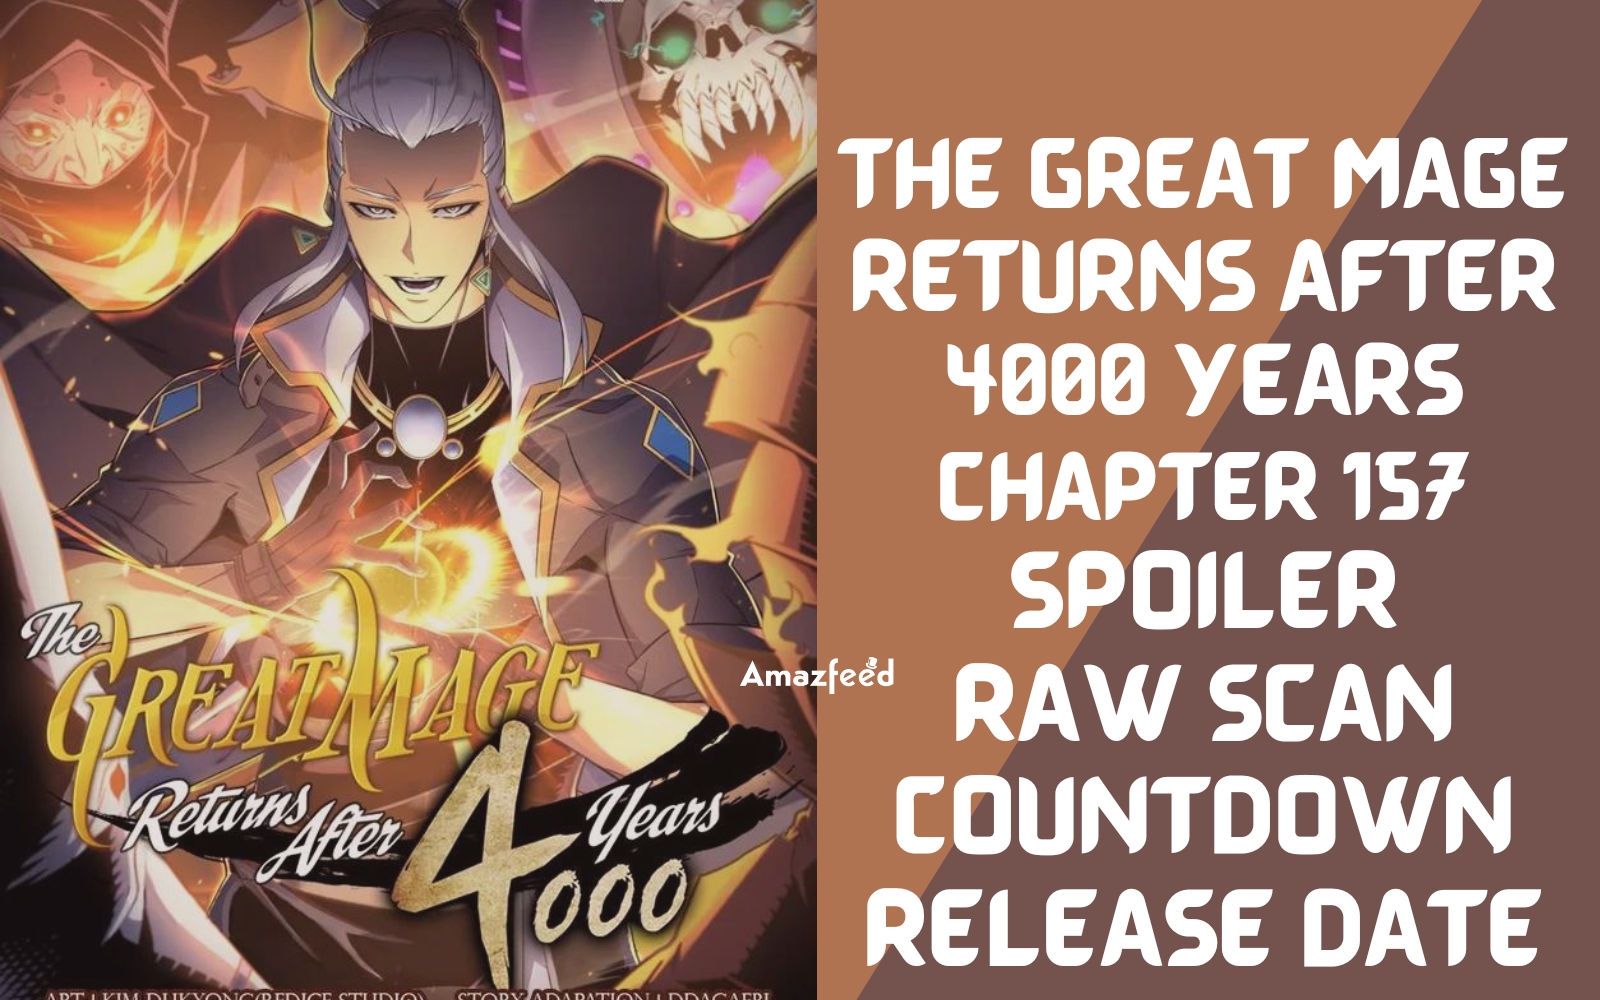 The Great Mage Returns After 4000 Years Chapter 157 Spoiler, Raw Scan, Release Date, Color Page